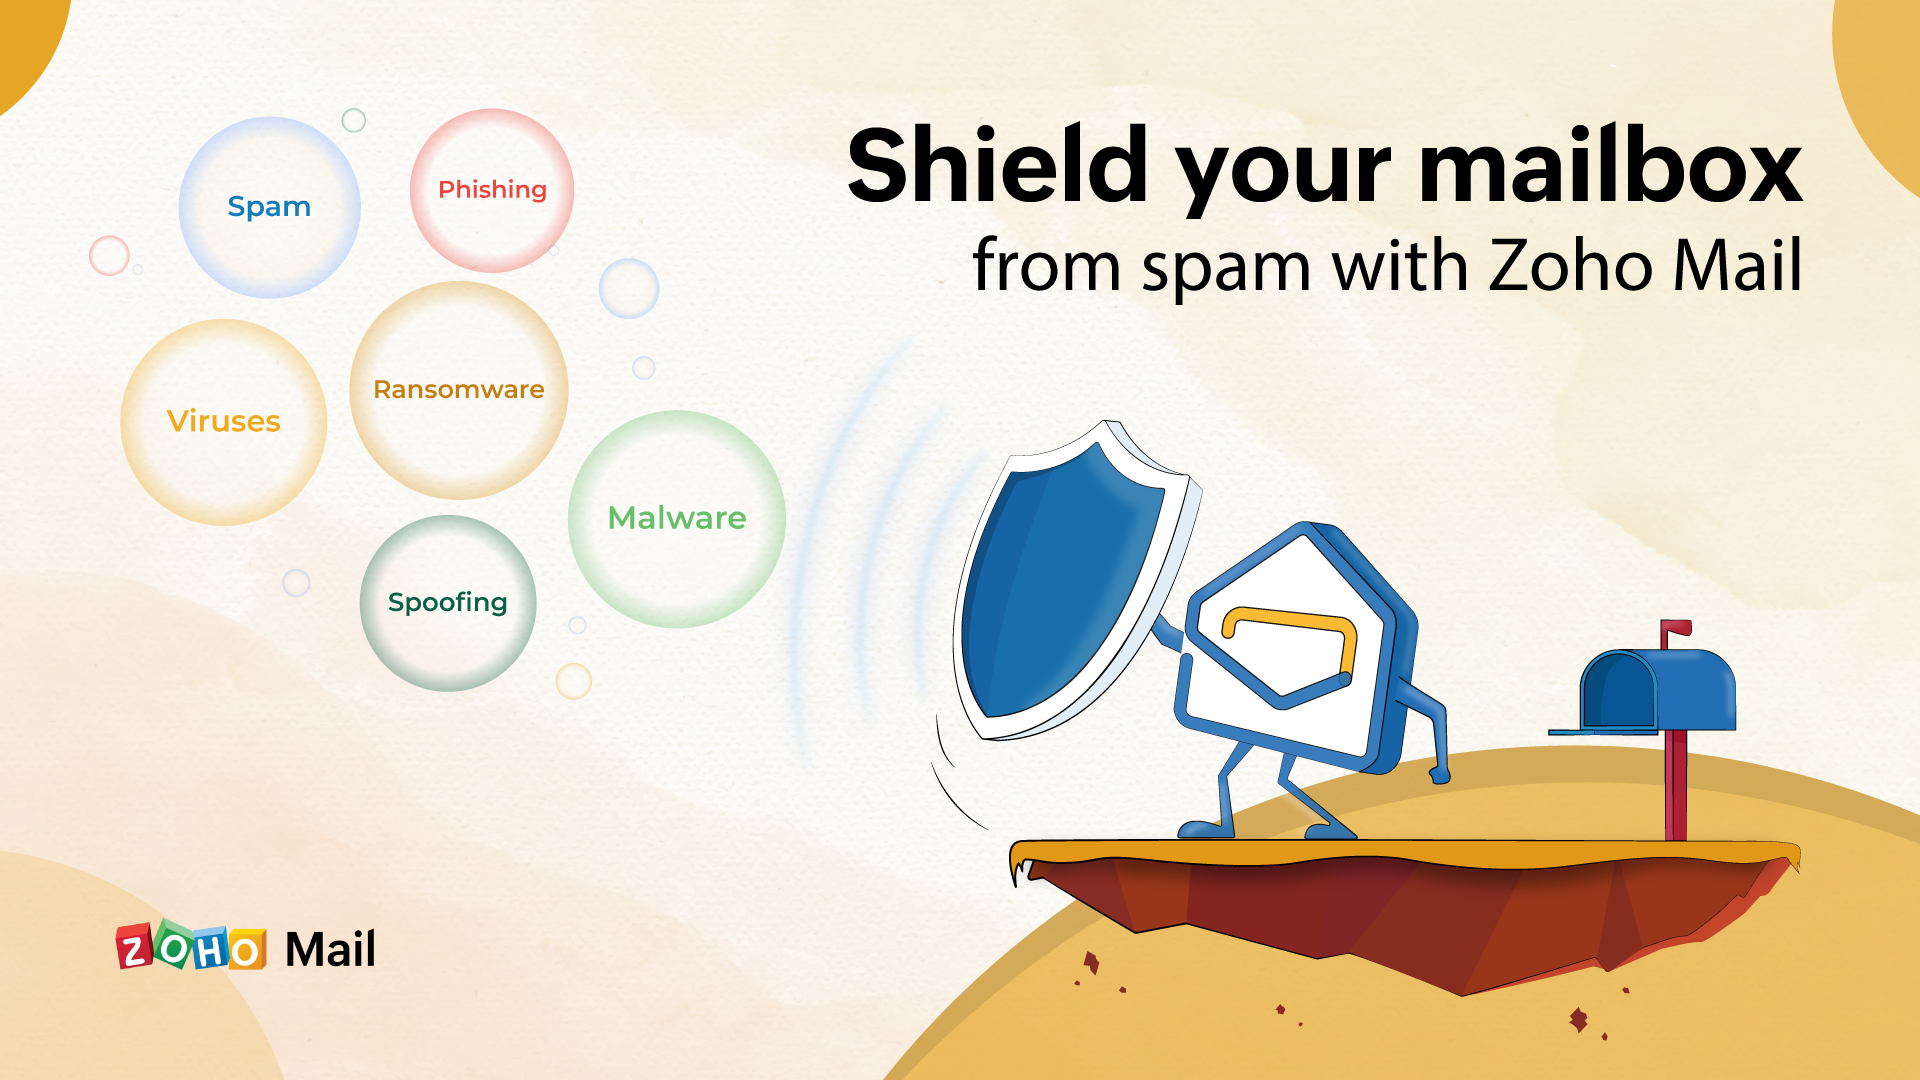 Shield your mailbox from spam with ZOHO Mail